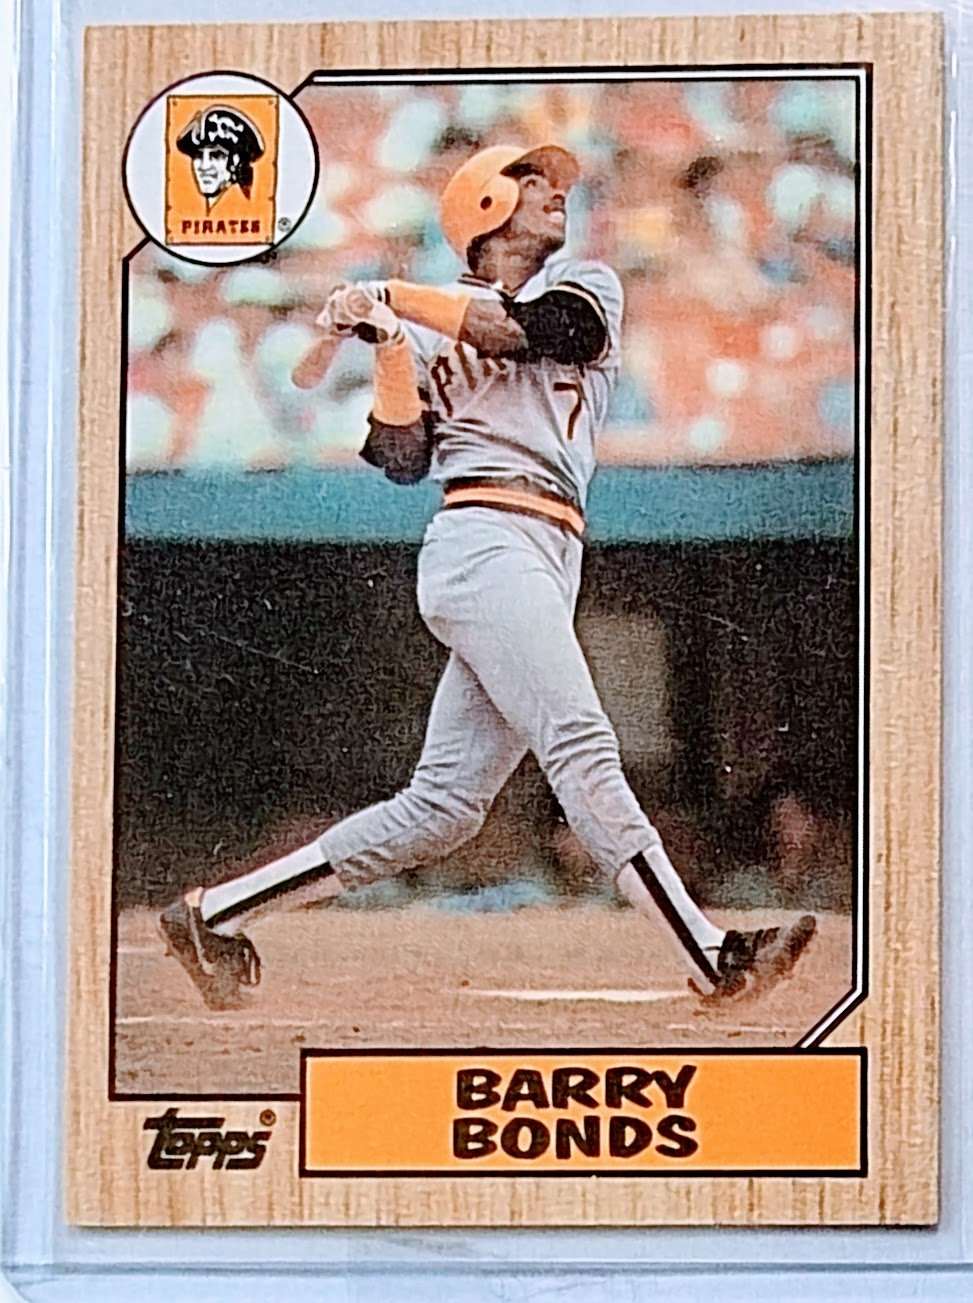 1987 Topps Barry Bonds Rookie Baseball Trading Card TPTV simple Xclusive Collectibles   